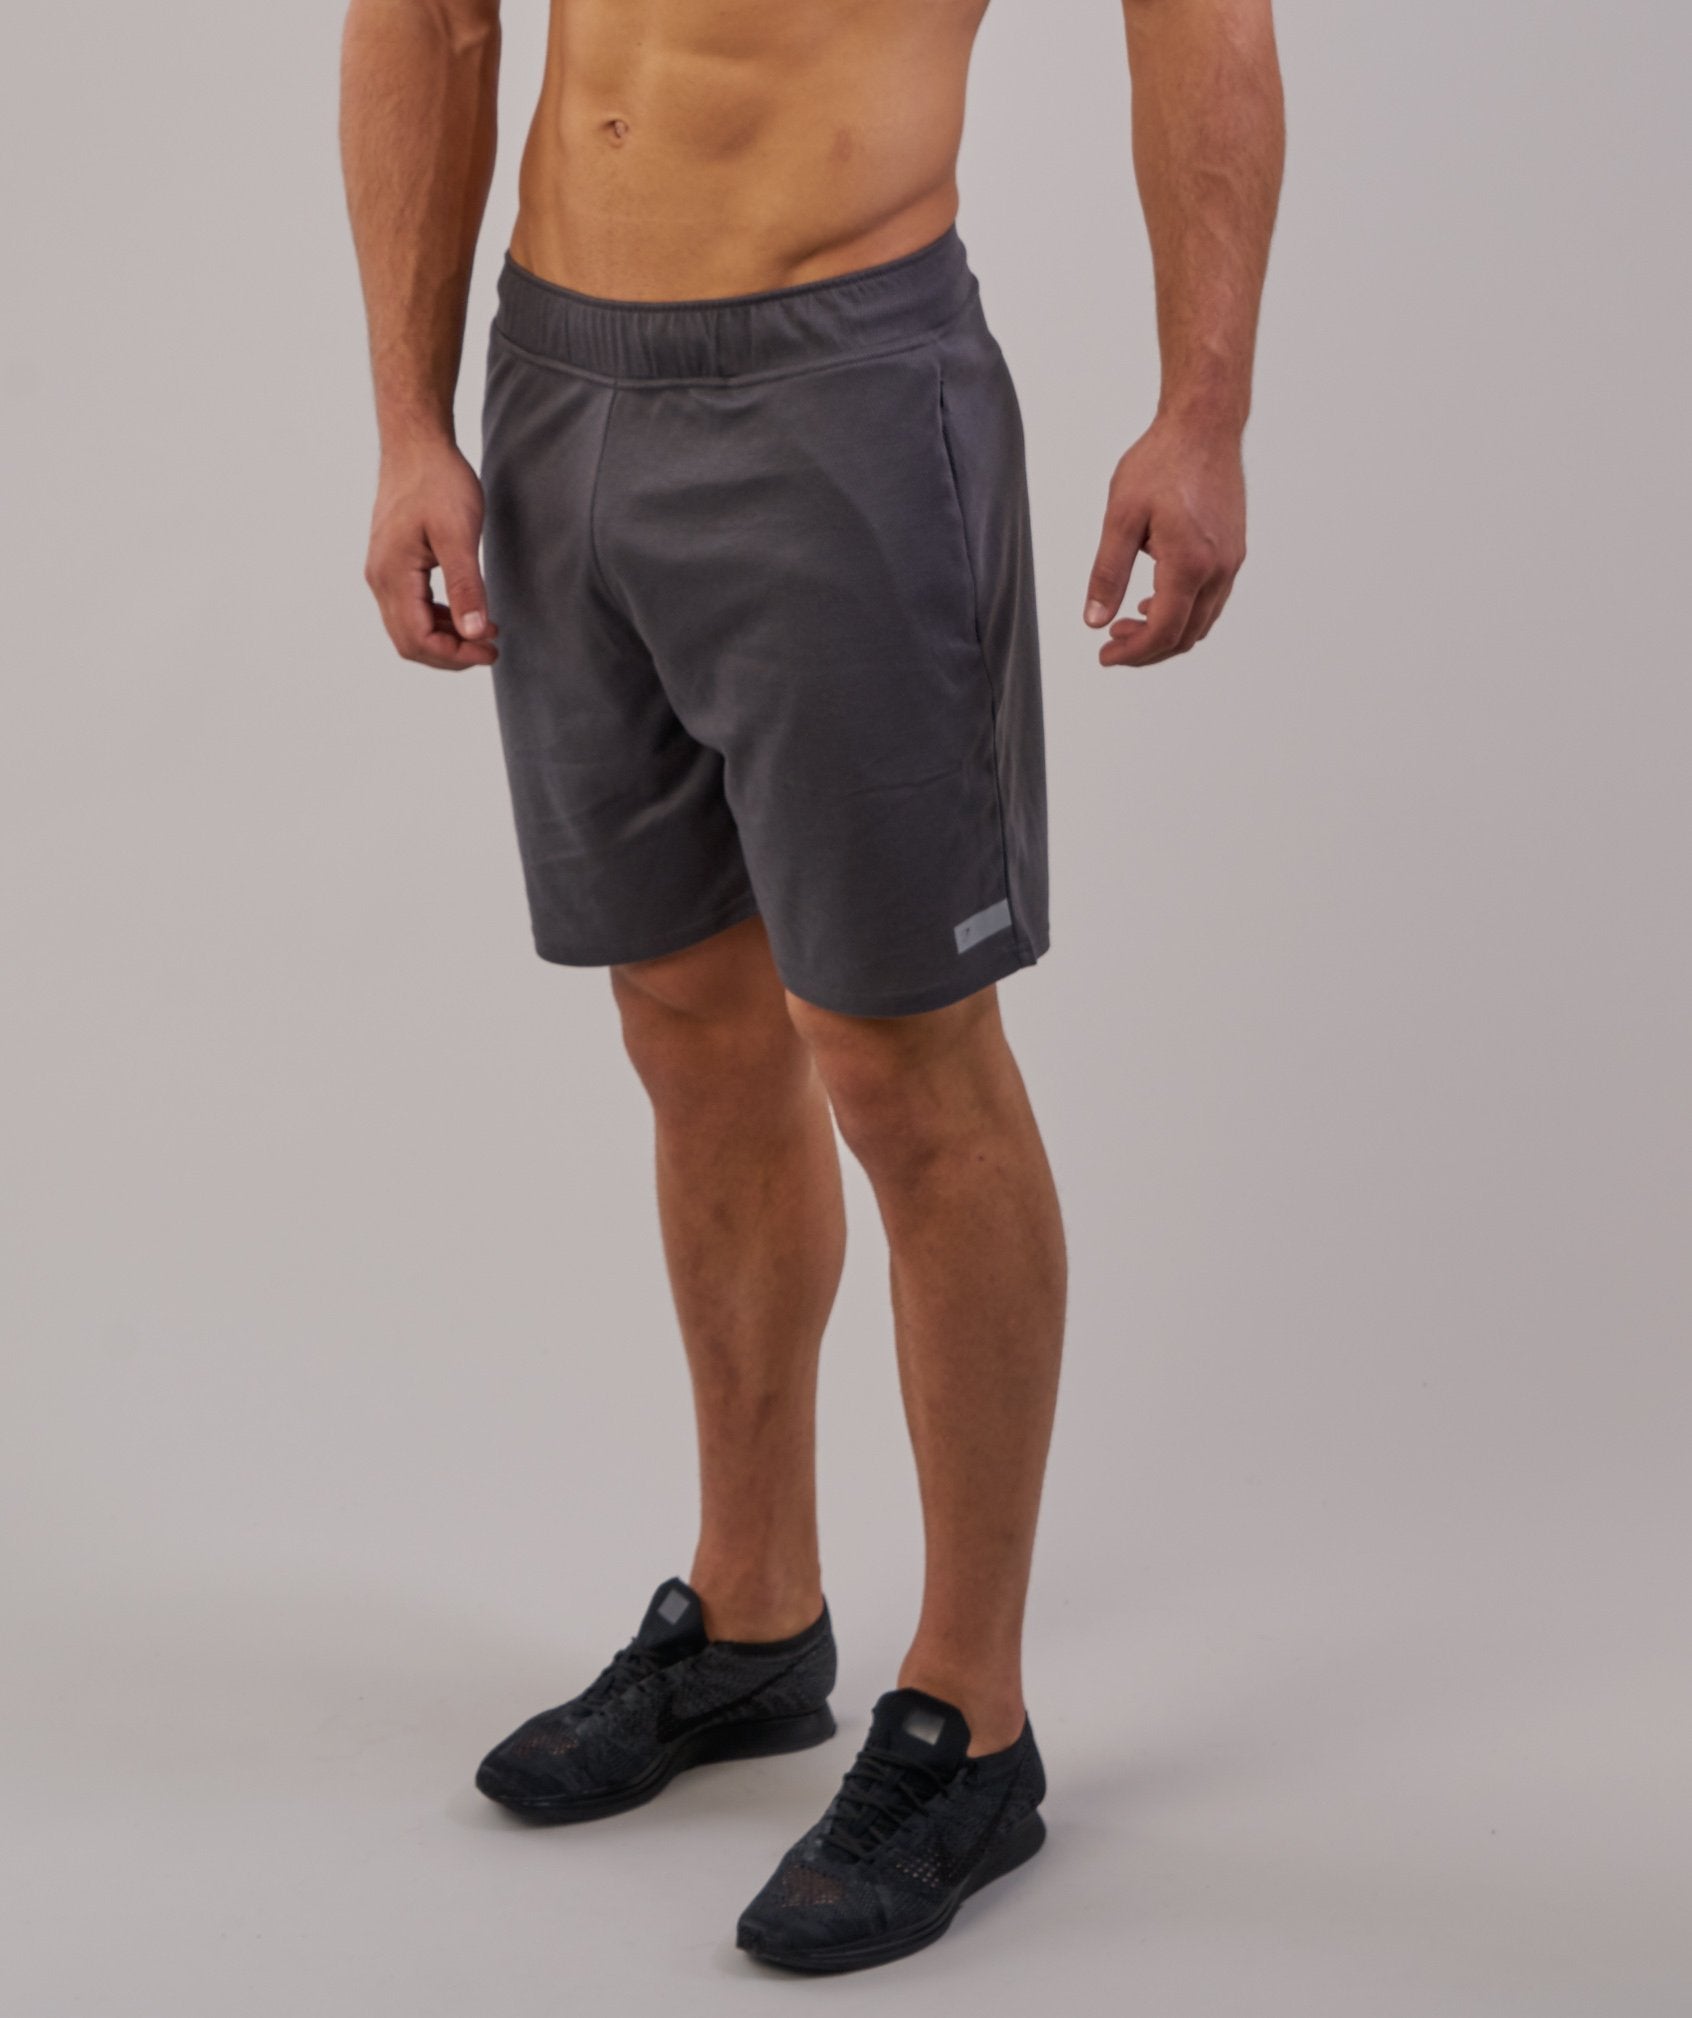 Free Flow Shorts in Charcoal - view 5